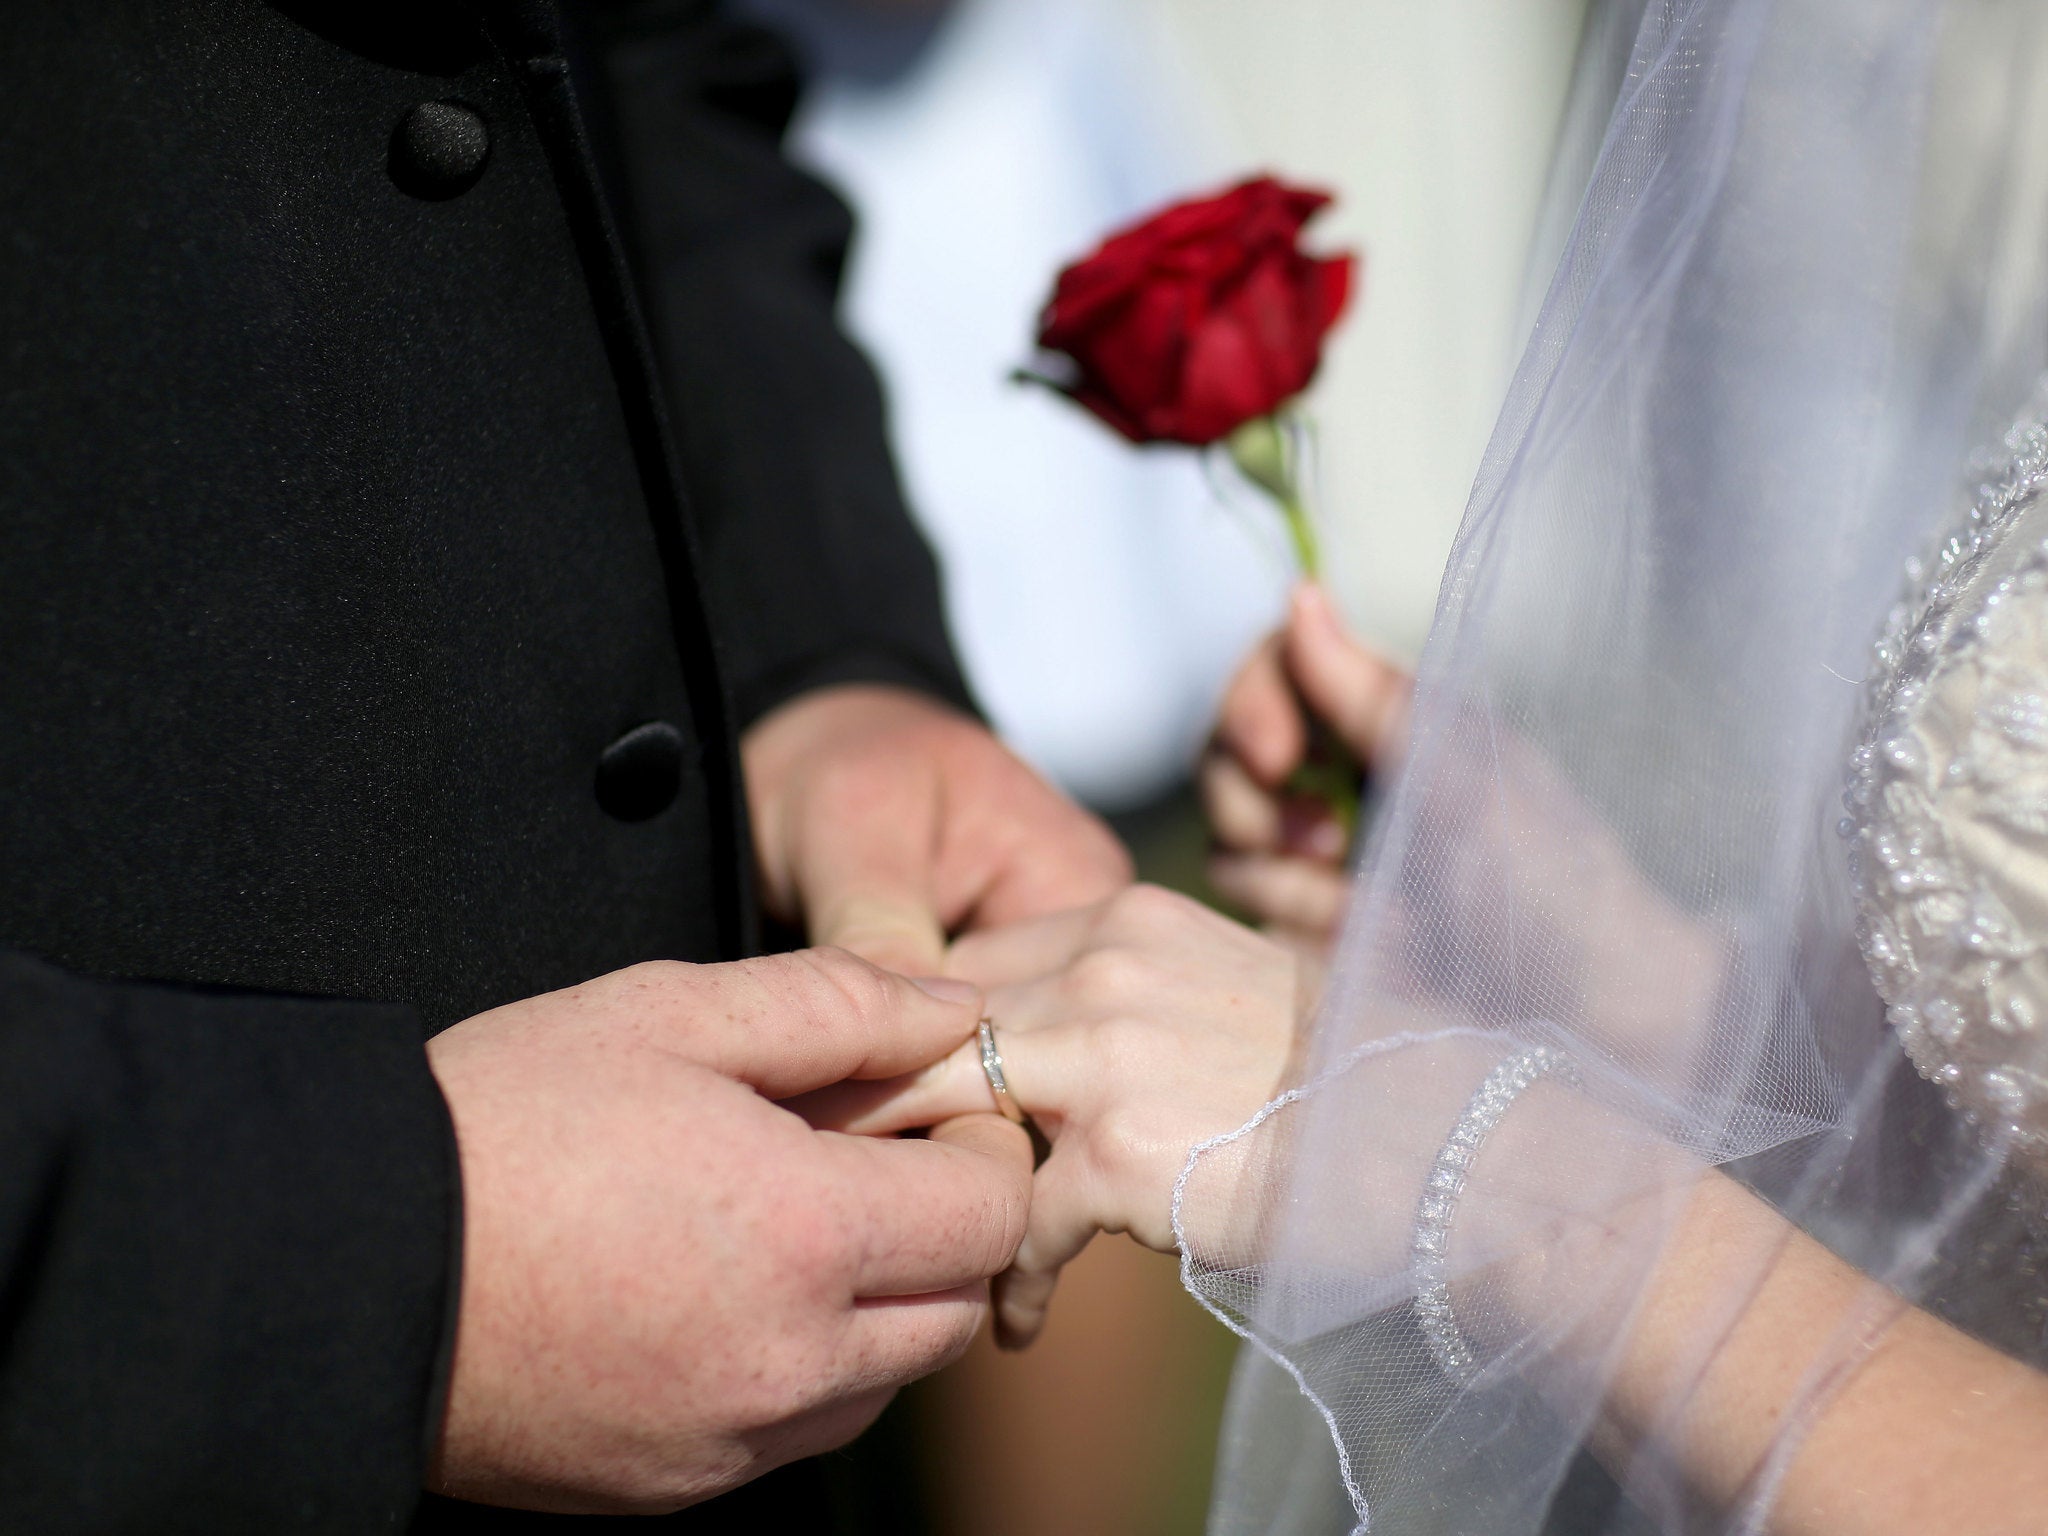 Under-18s still need permission from their parents or a judge to get married in Spain